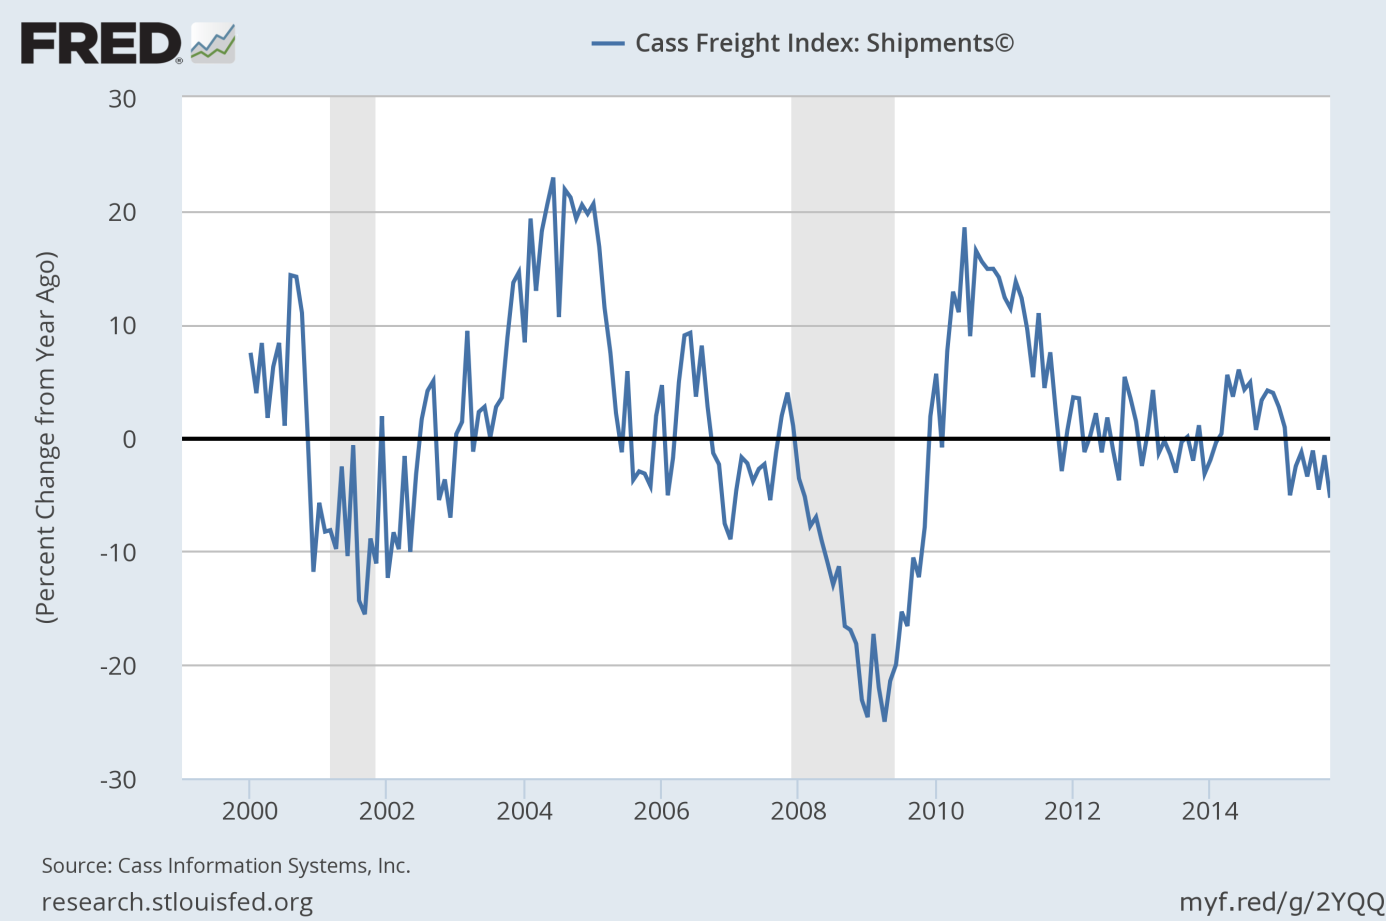 The Cass Freight Shipments Index from 1999 to 2015 (as percent change from year ago).